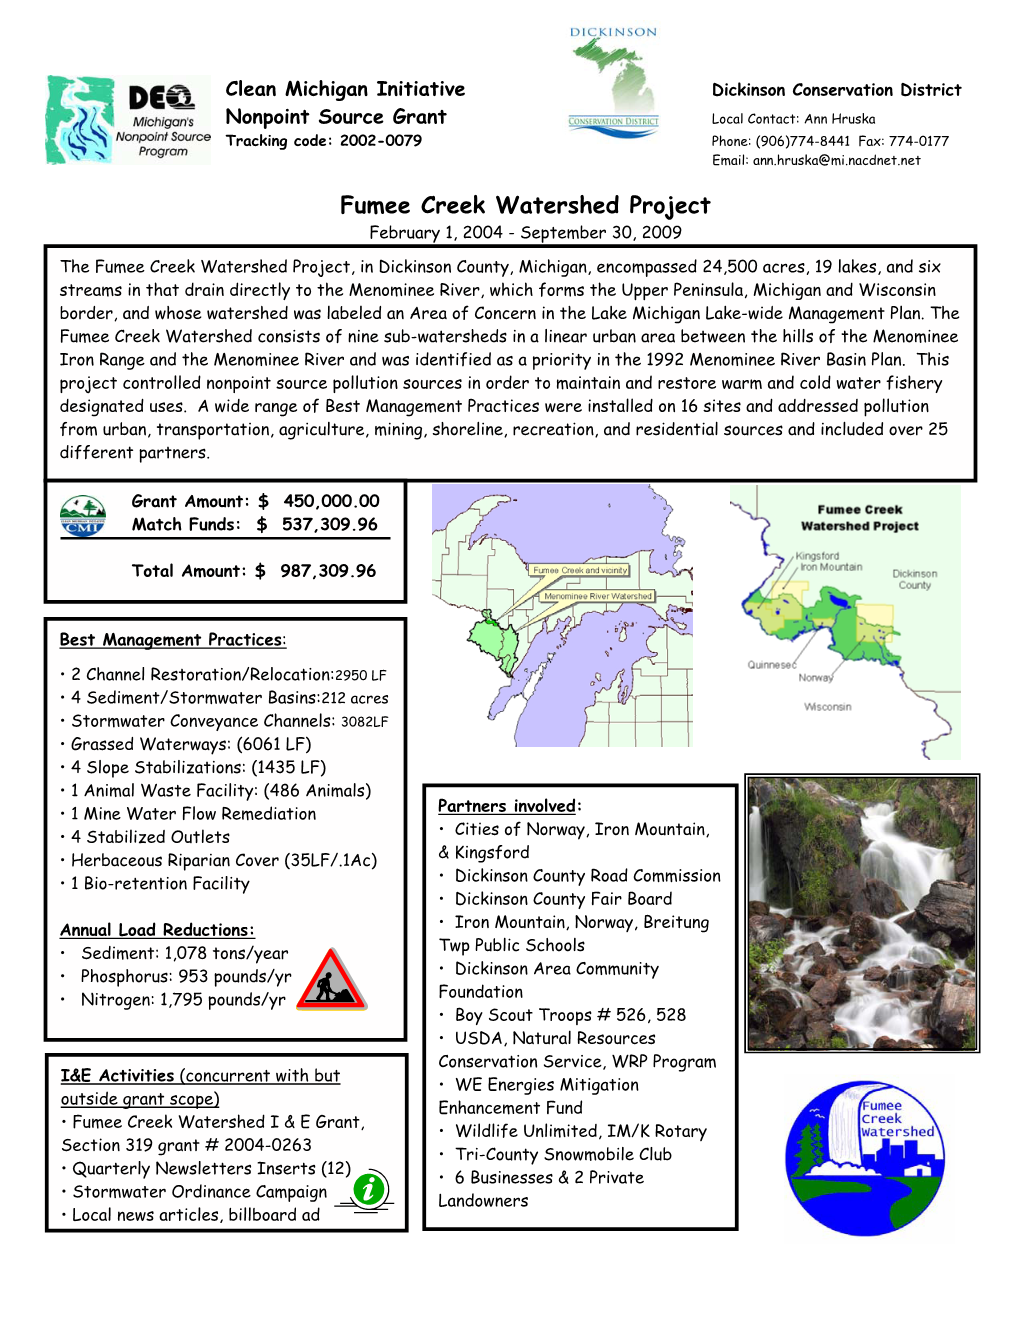 Fumee Creek Watershed Project February 1, 2004 - September 30, 2009